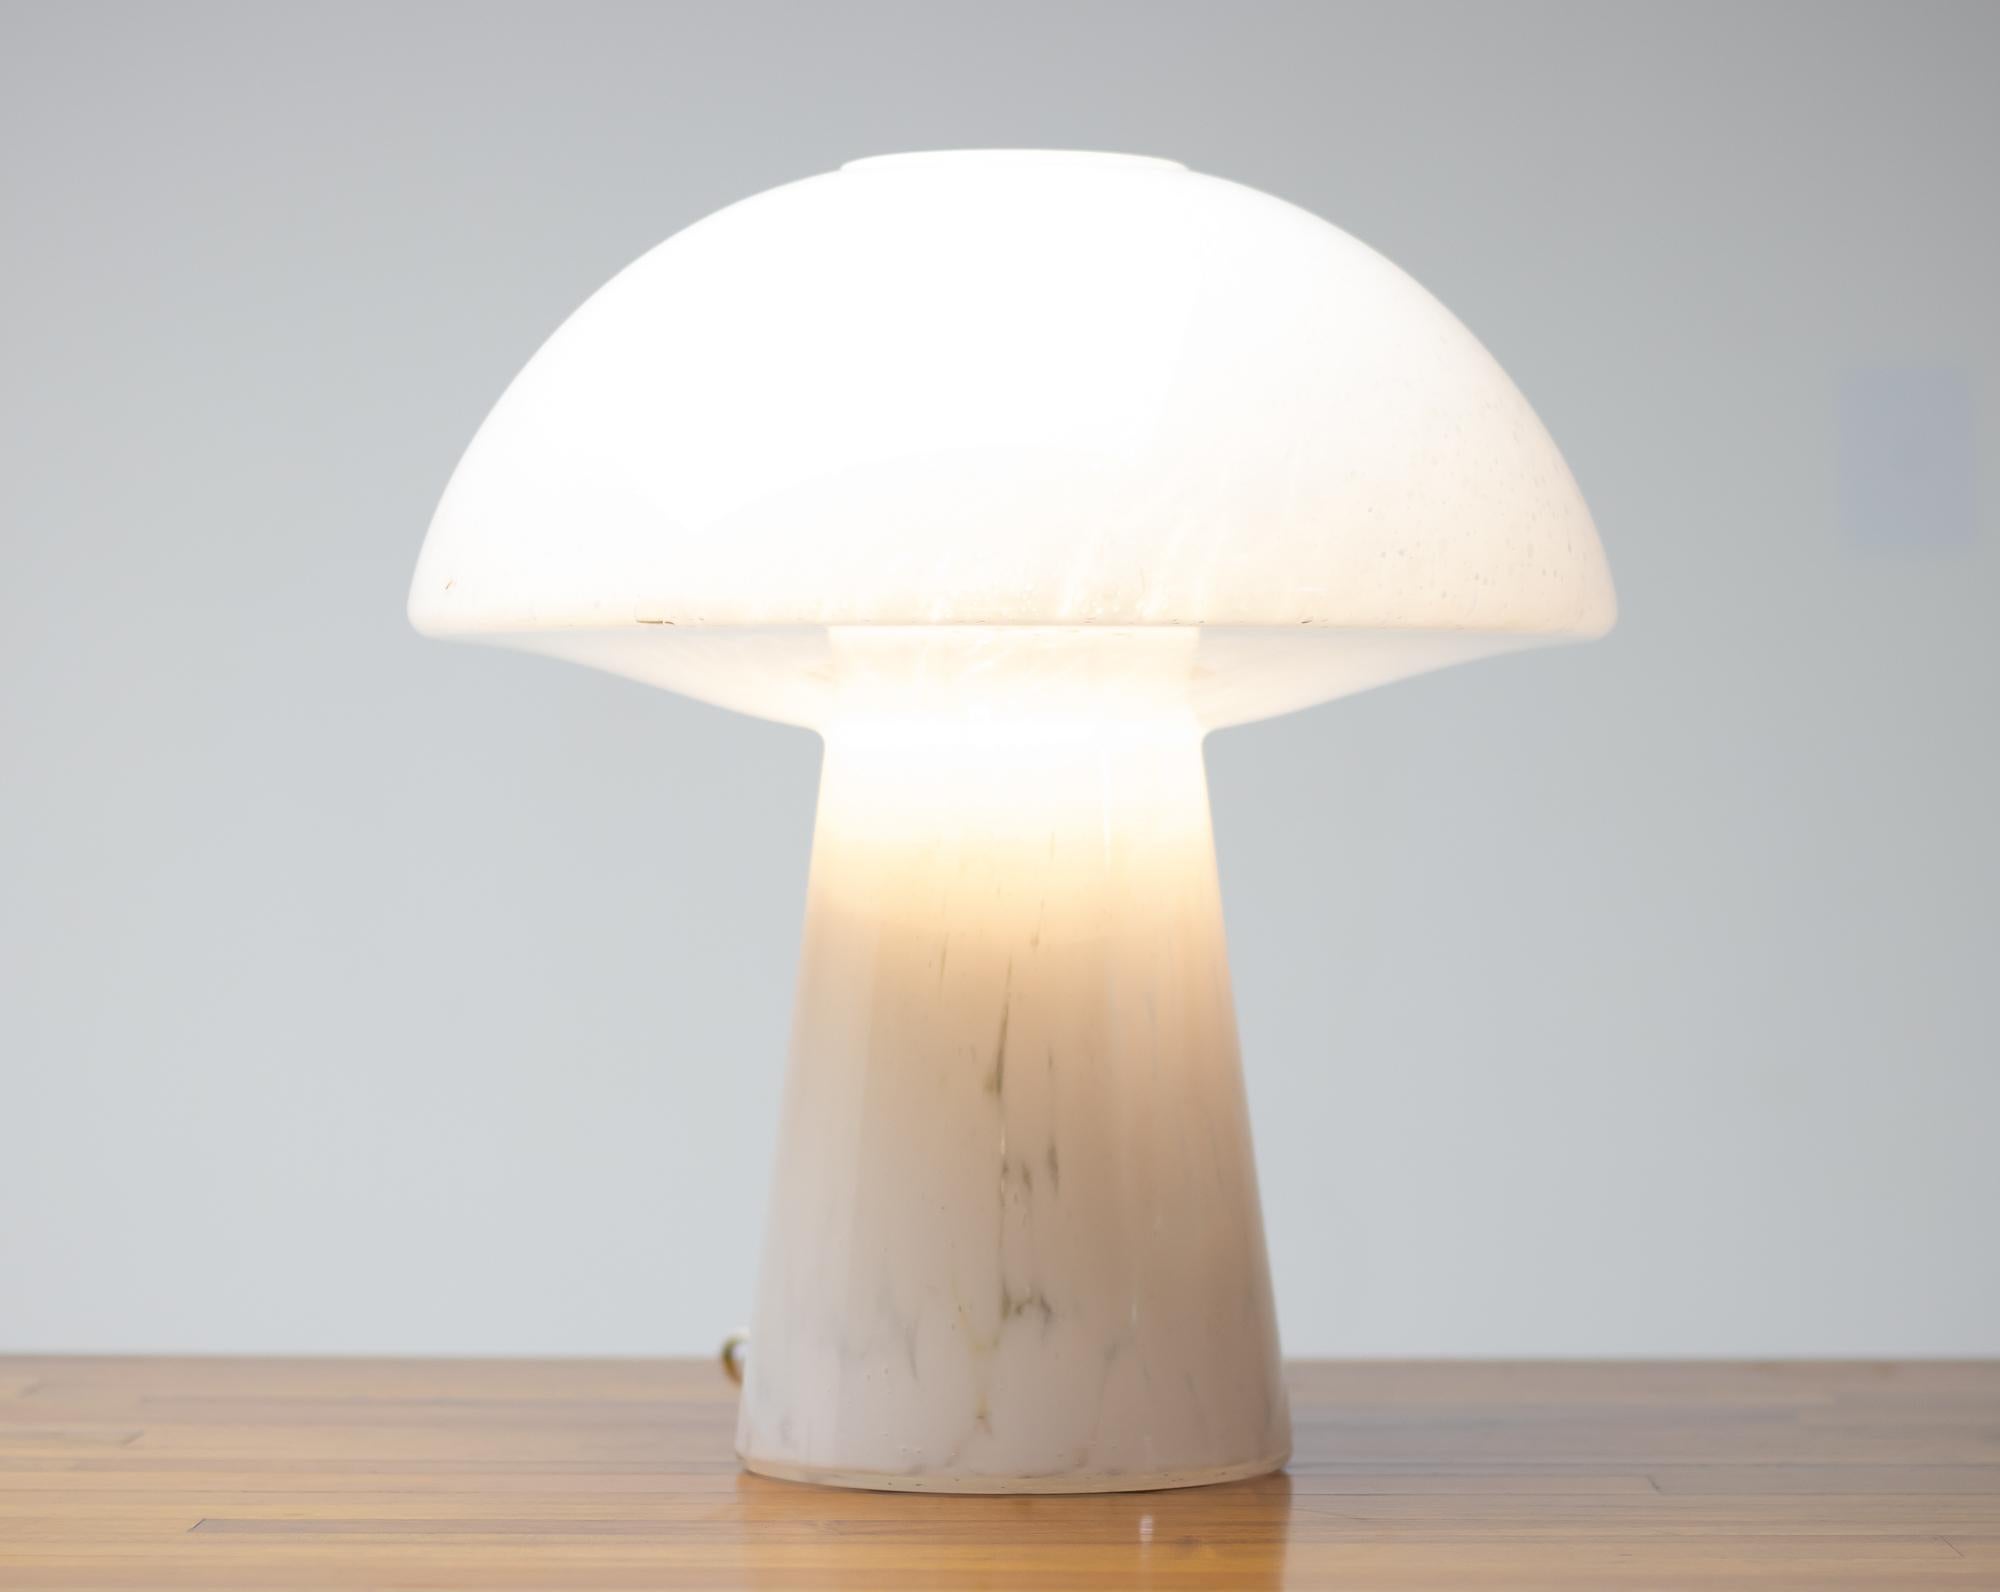 Exceptional large table lamp in online glass by Glashütte Limburg Leuchten, circa 1970.
Marked with label at the base, suitable for use in the US.